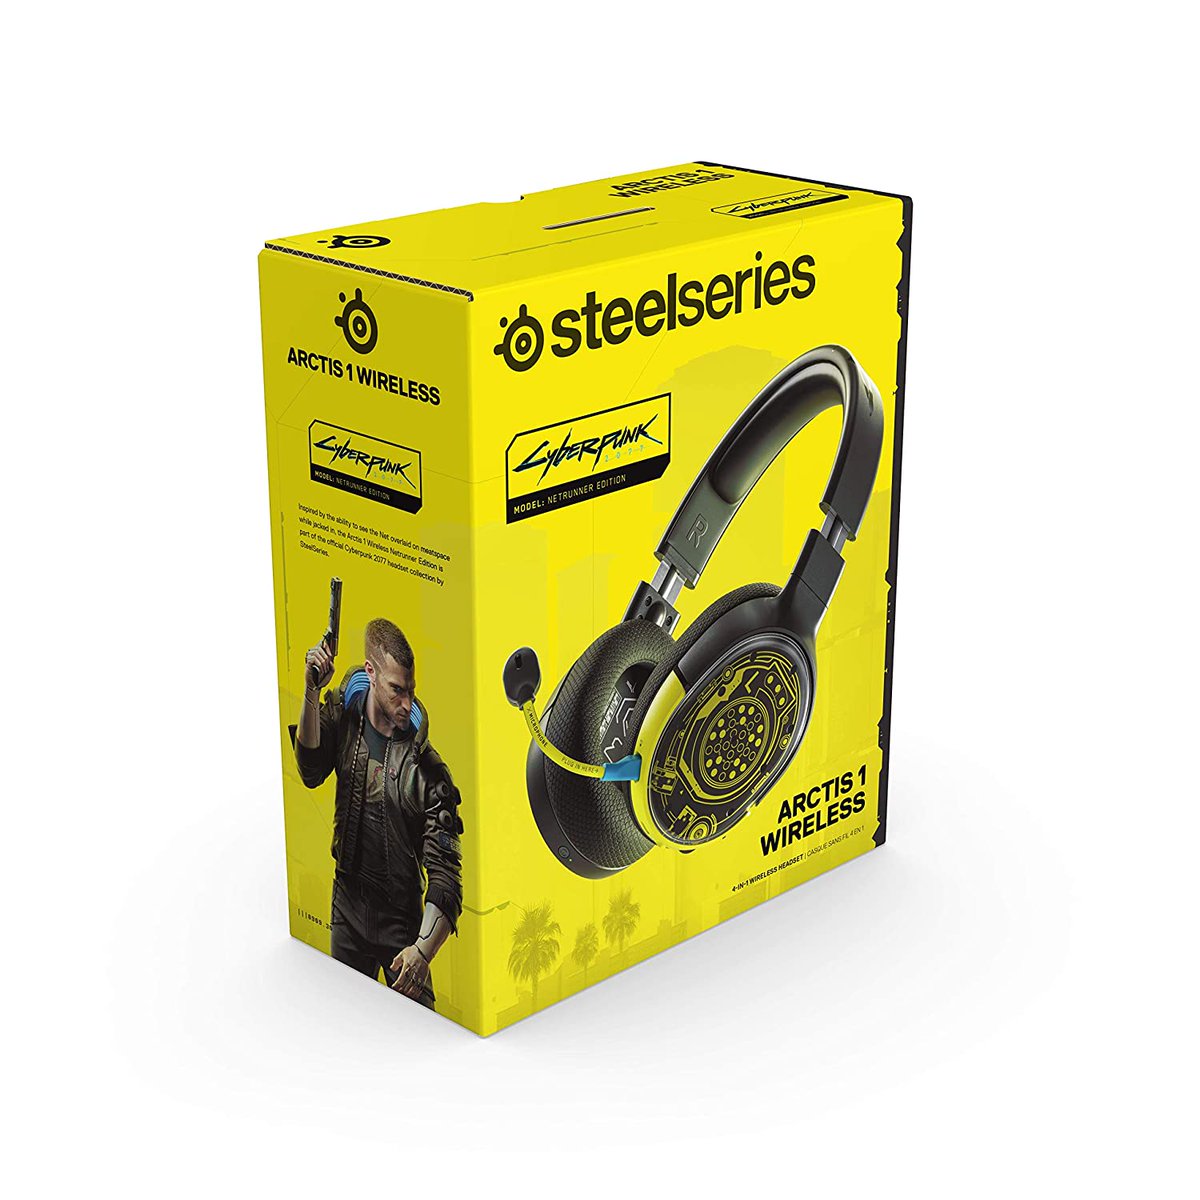 Wario64 Steelseries Arctis 1 Wireless Cyberpunk Limited Edition Gaming Headset Is Up For Preorder On Amazon Compatible With Ps4 Pc Xbox Switch Switch Lite Android 109 99 T Co Pjxklqx2ml Includes Usb C Wireless Dongle That Can